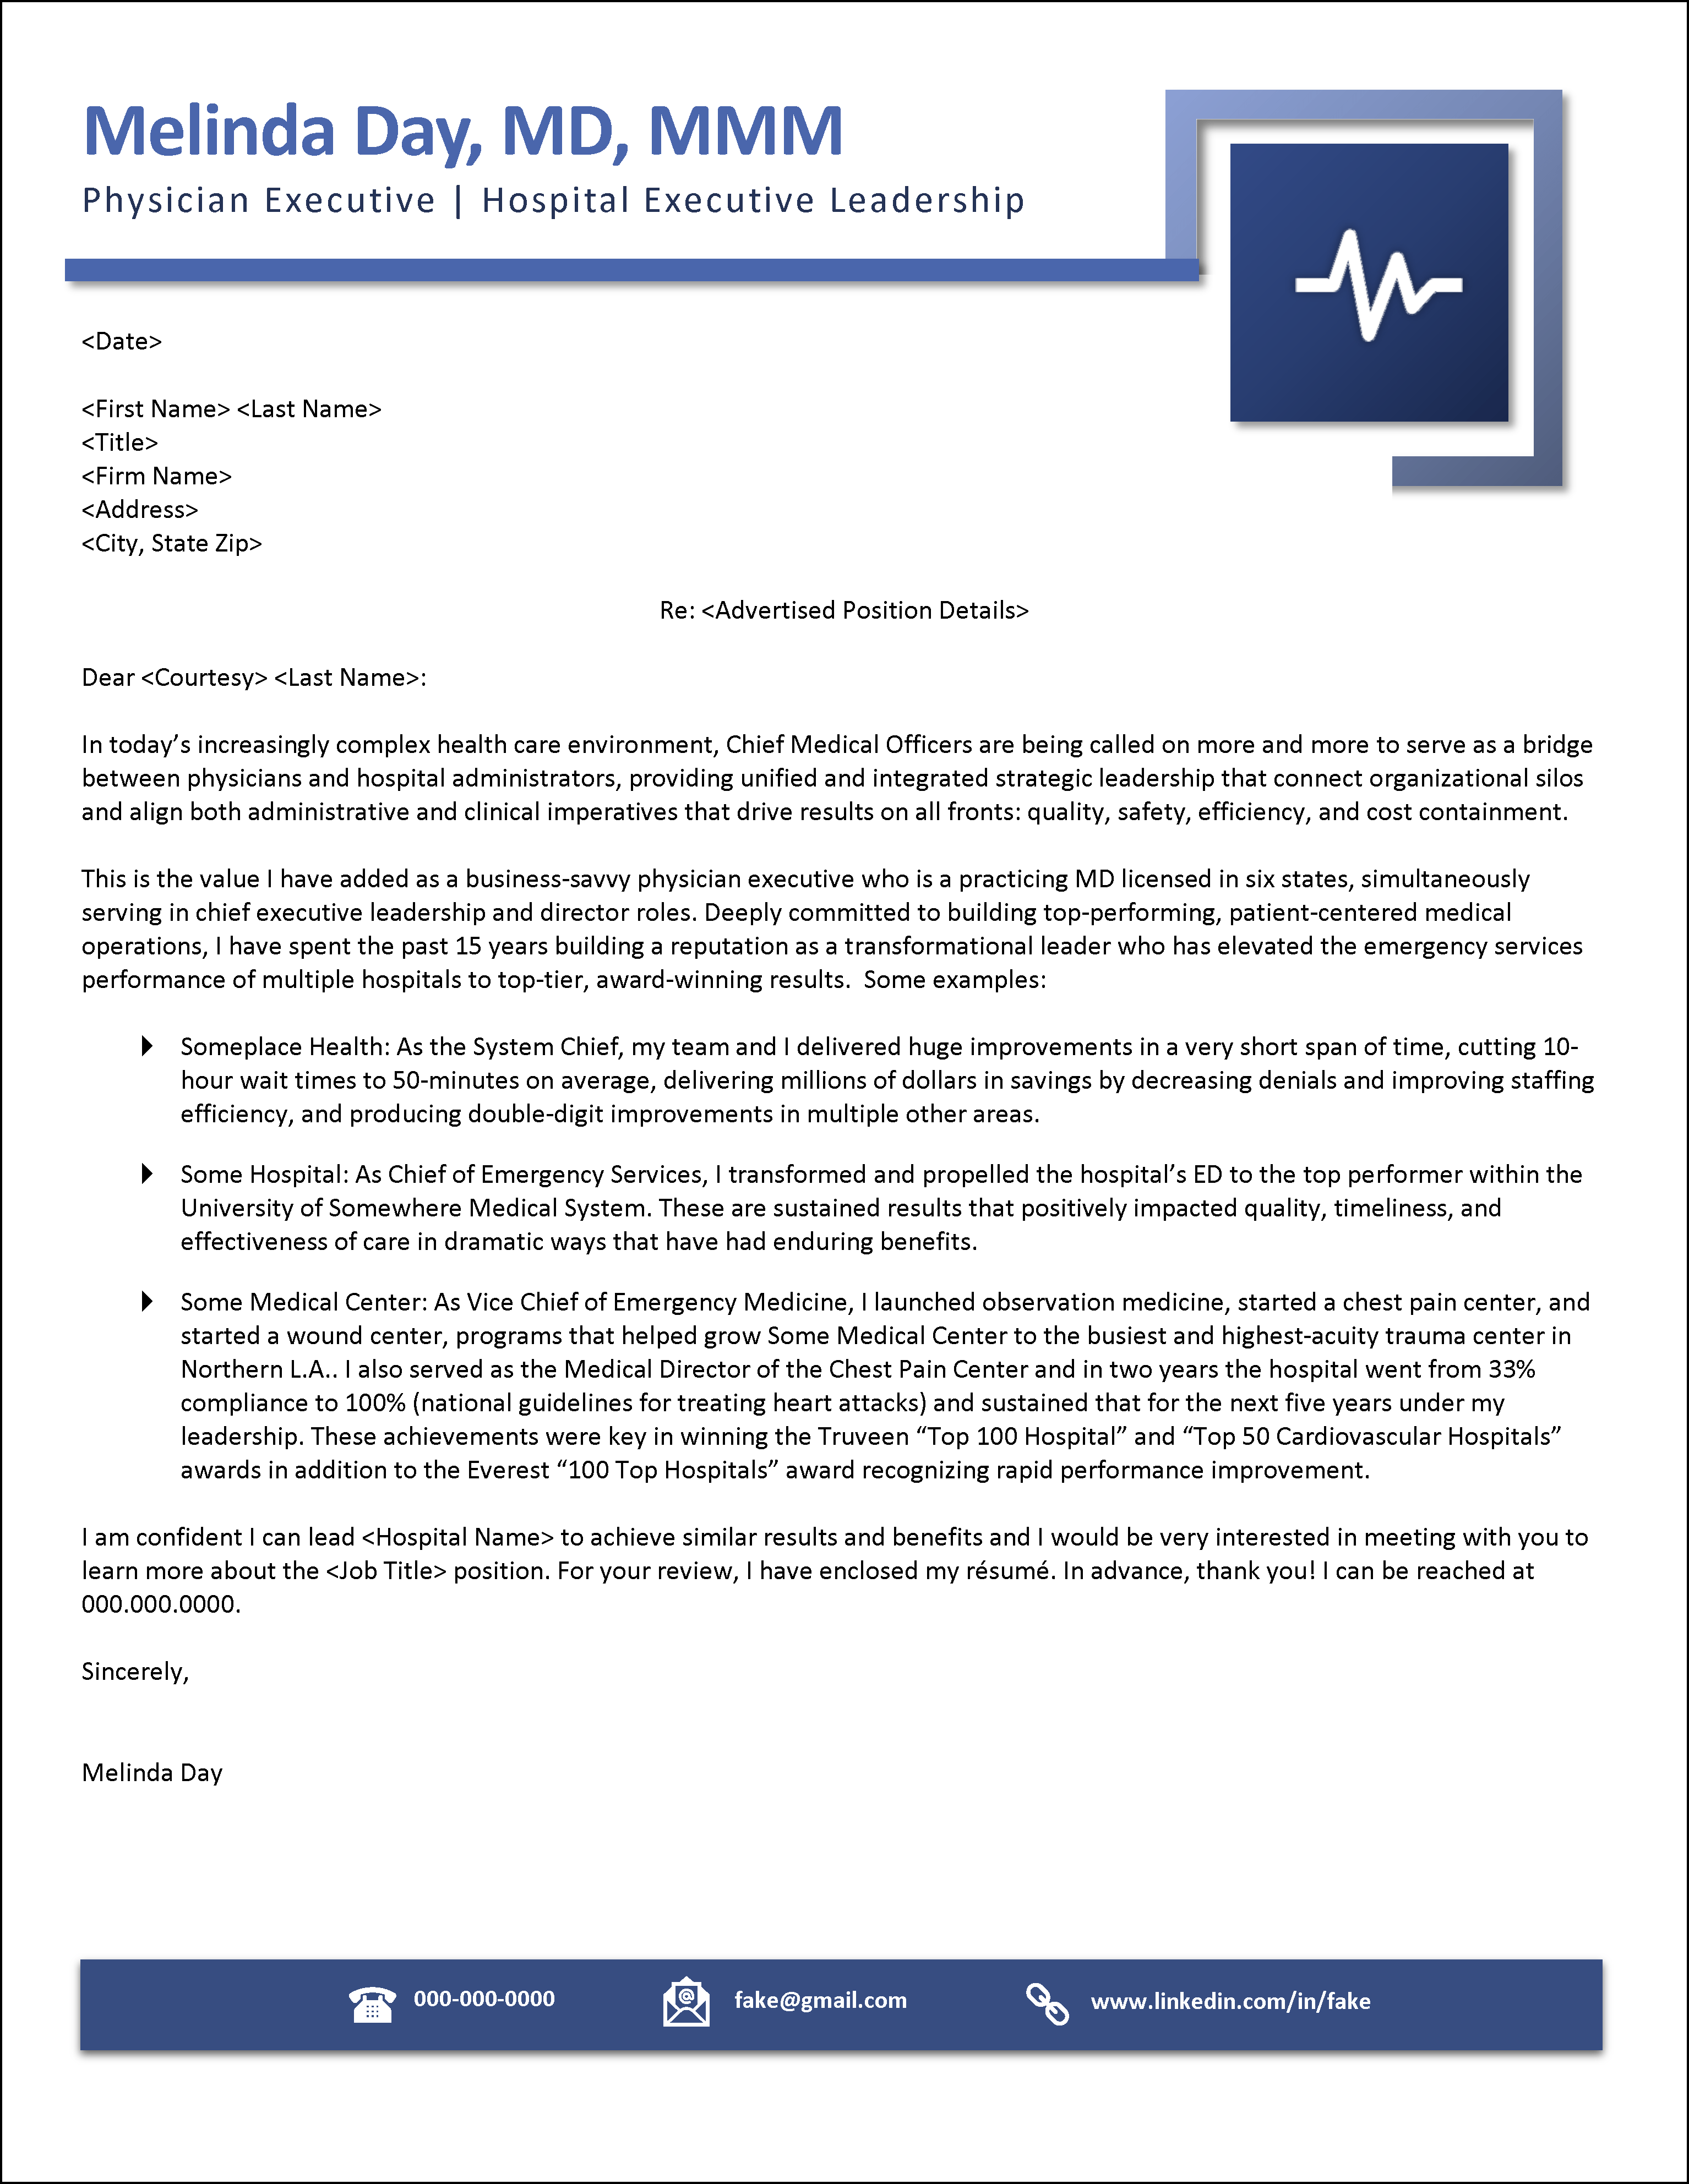 Example Job Ad Response Cover Letter